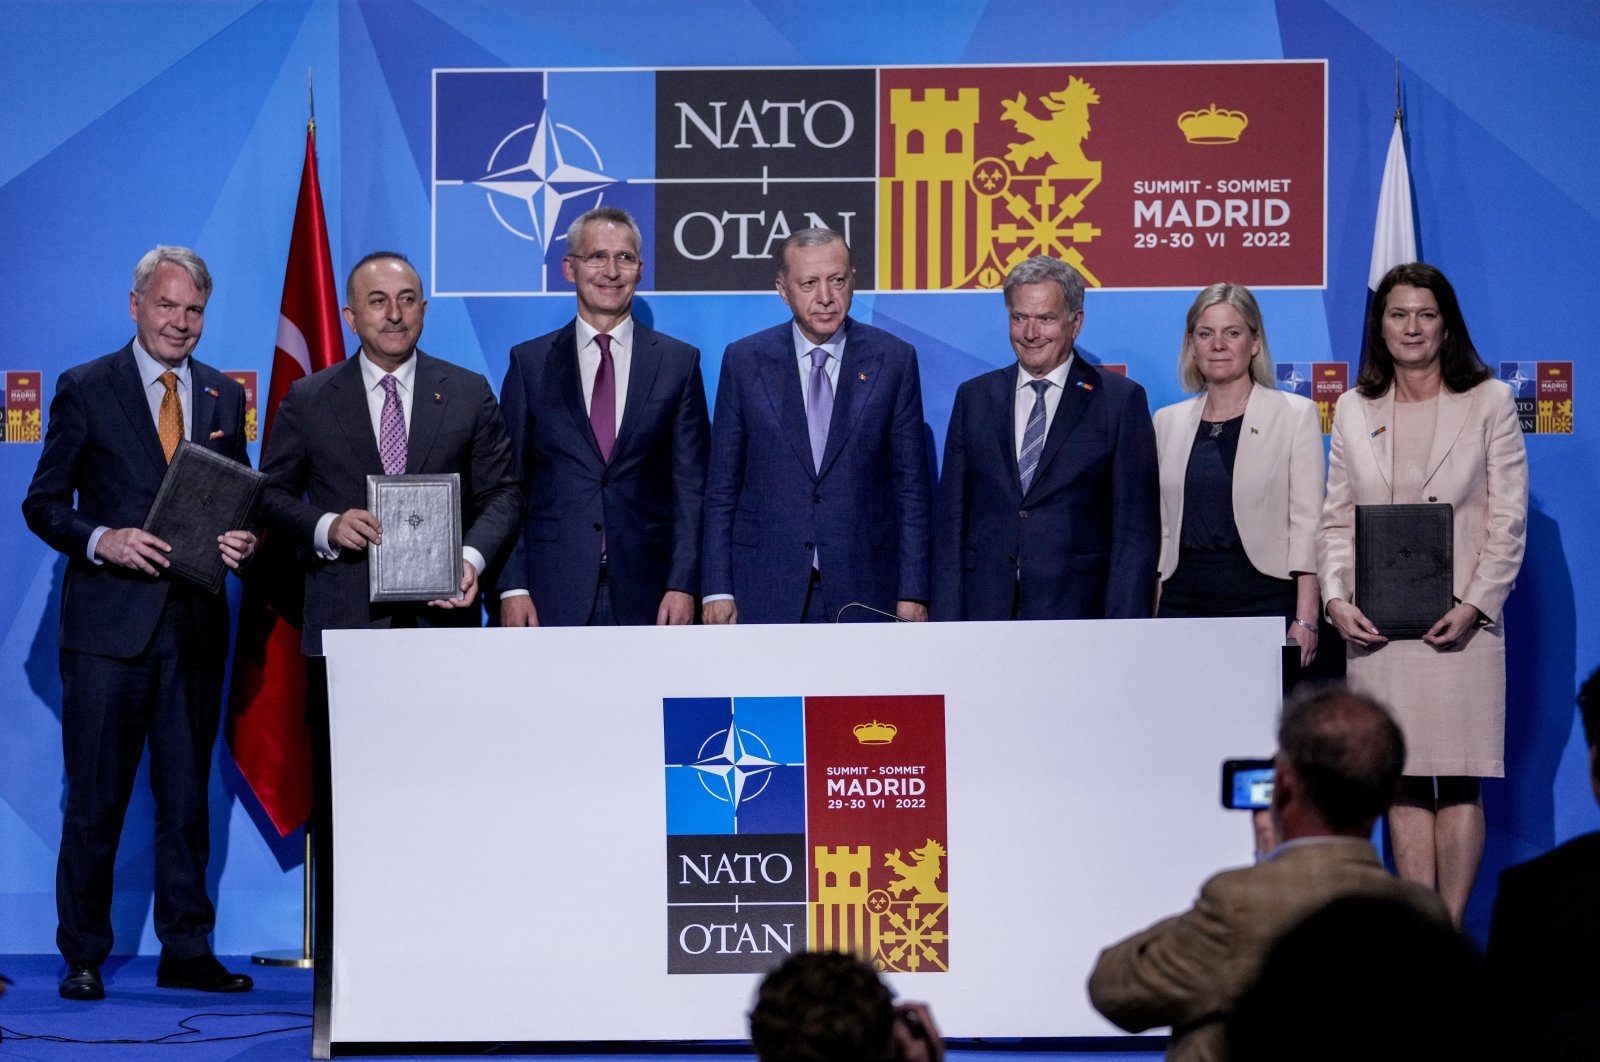 From left to right, Finnish Foreign Minister Pekka Haavisto, Turkish Foreign Minister Mevlüt Çavuşoğlu, NATO Secretary-General Jens Stoltenberg, Turkish President Recep Tayyip Erdoğan, Finland&#039;s President Sauli Niinisto, Sweden&#039;s Prime Minister Magdalena Andersson and Sweden&#039;s Foreign Minister Ann Linde pose for a picture after signing a memorandum in which Turkey agrees to Finland and Sweden&#039;s membership of the defense alliance in Madrid, Spain, June 28, 2022. (AP Photo)